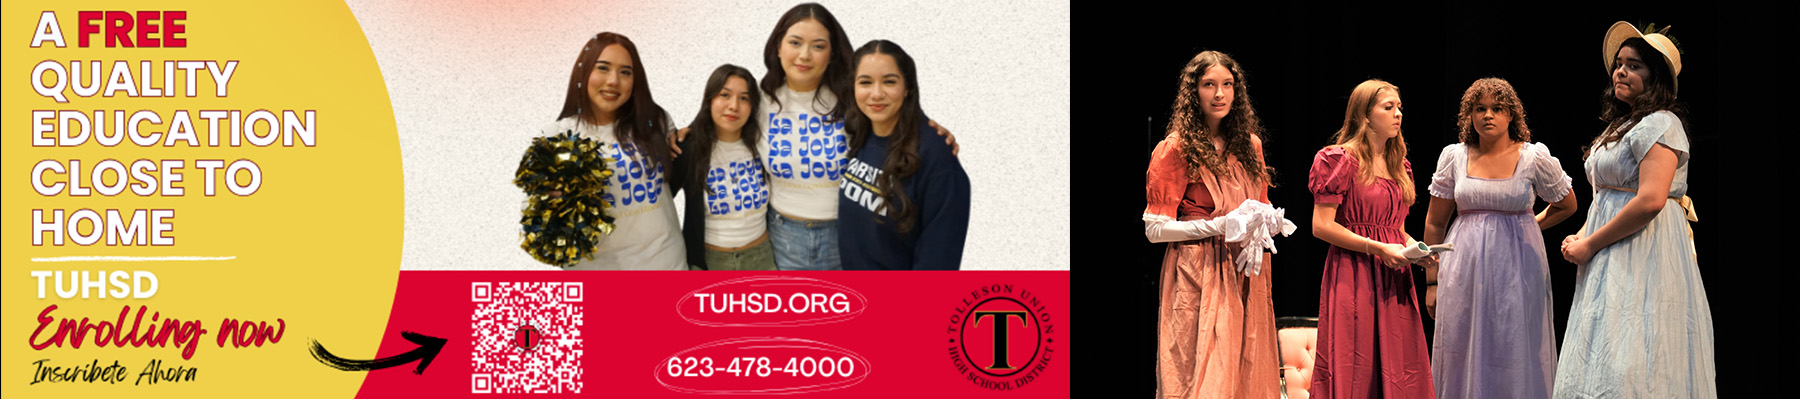 SUPPORT OUR SCHOOLS WITH A TAX CREDIT DONATION! Single person donation of $200 or married joint filing donation of $400 Remember TUHSD when you're filing your taxes! | Four girls in dresses on stage